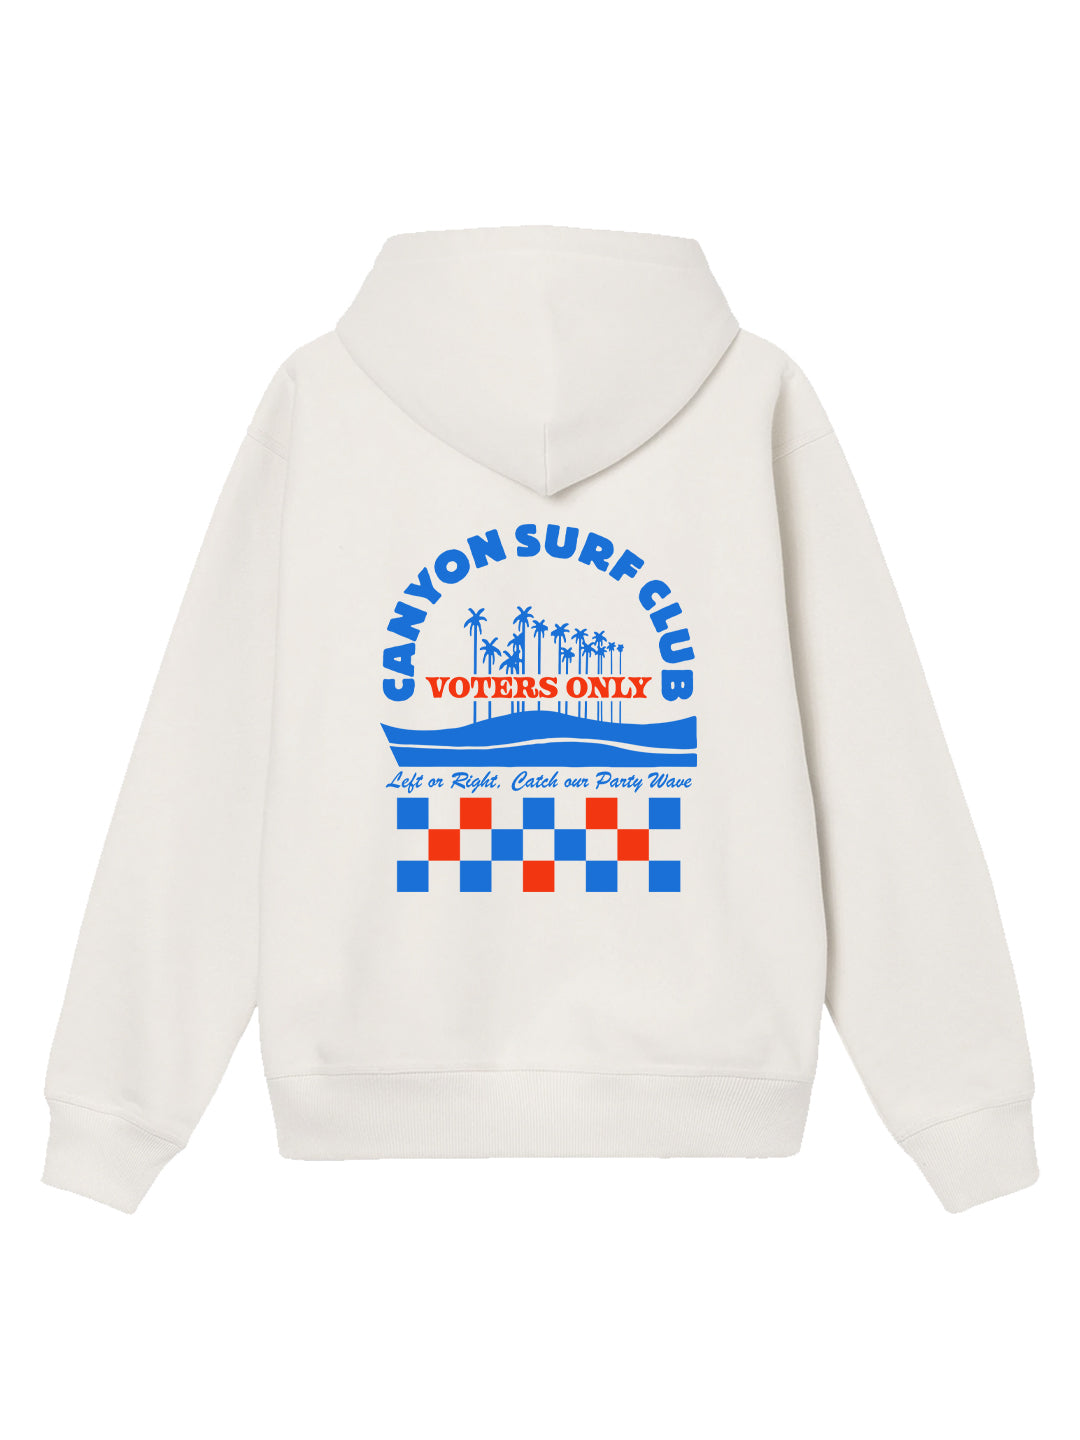 Voters Only Hoodie